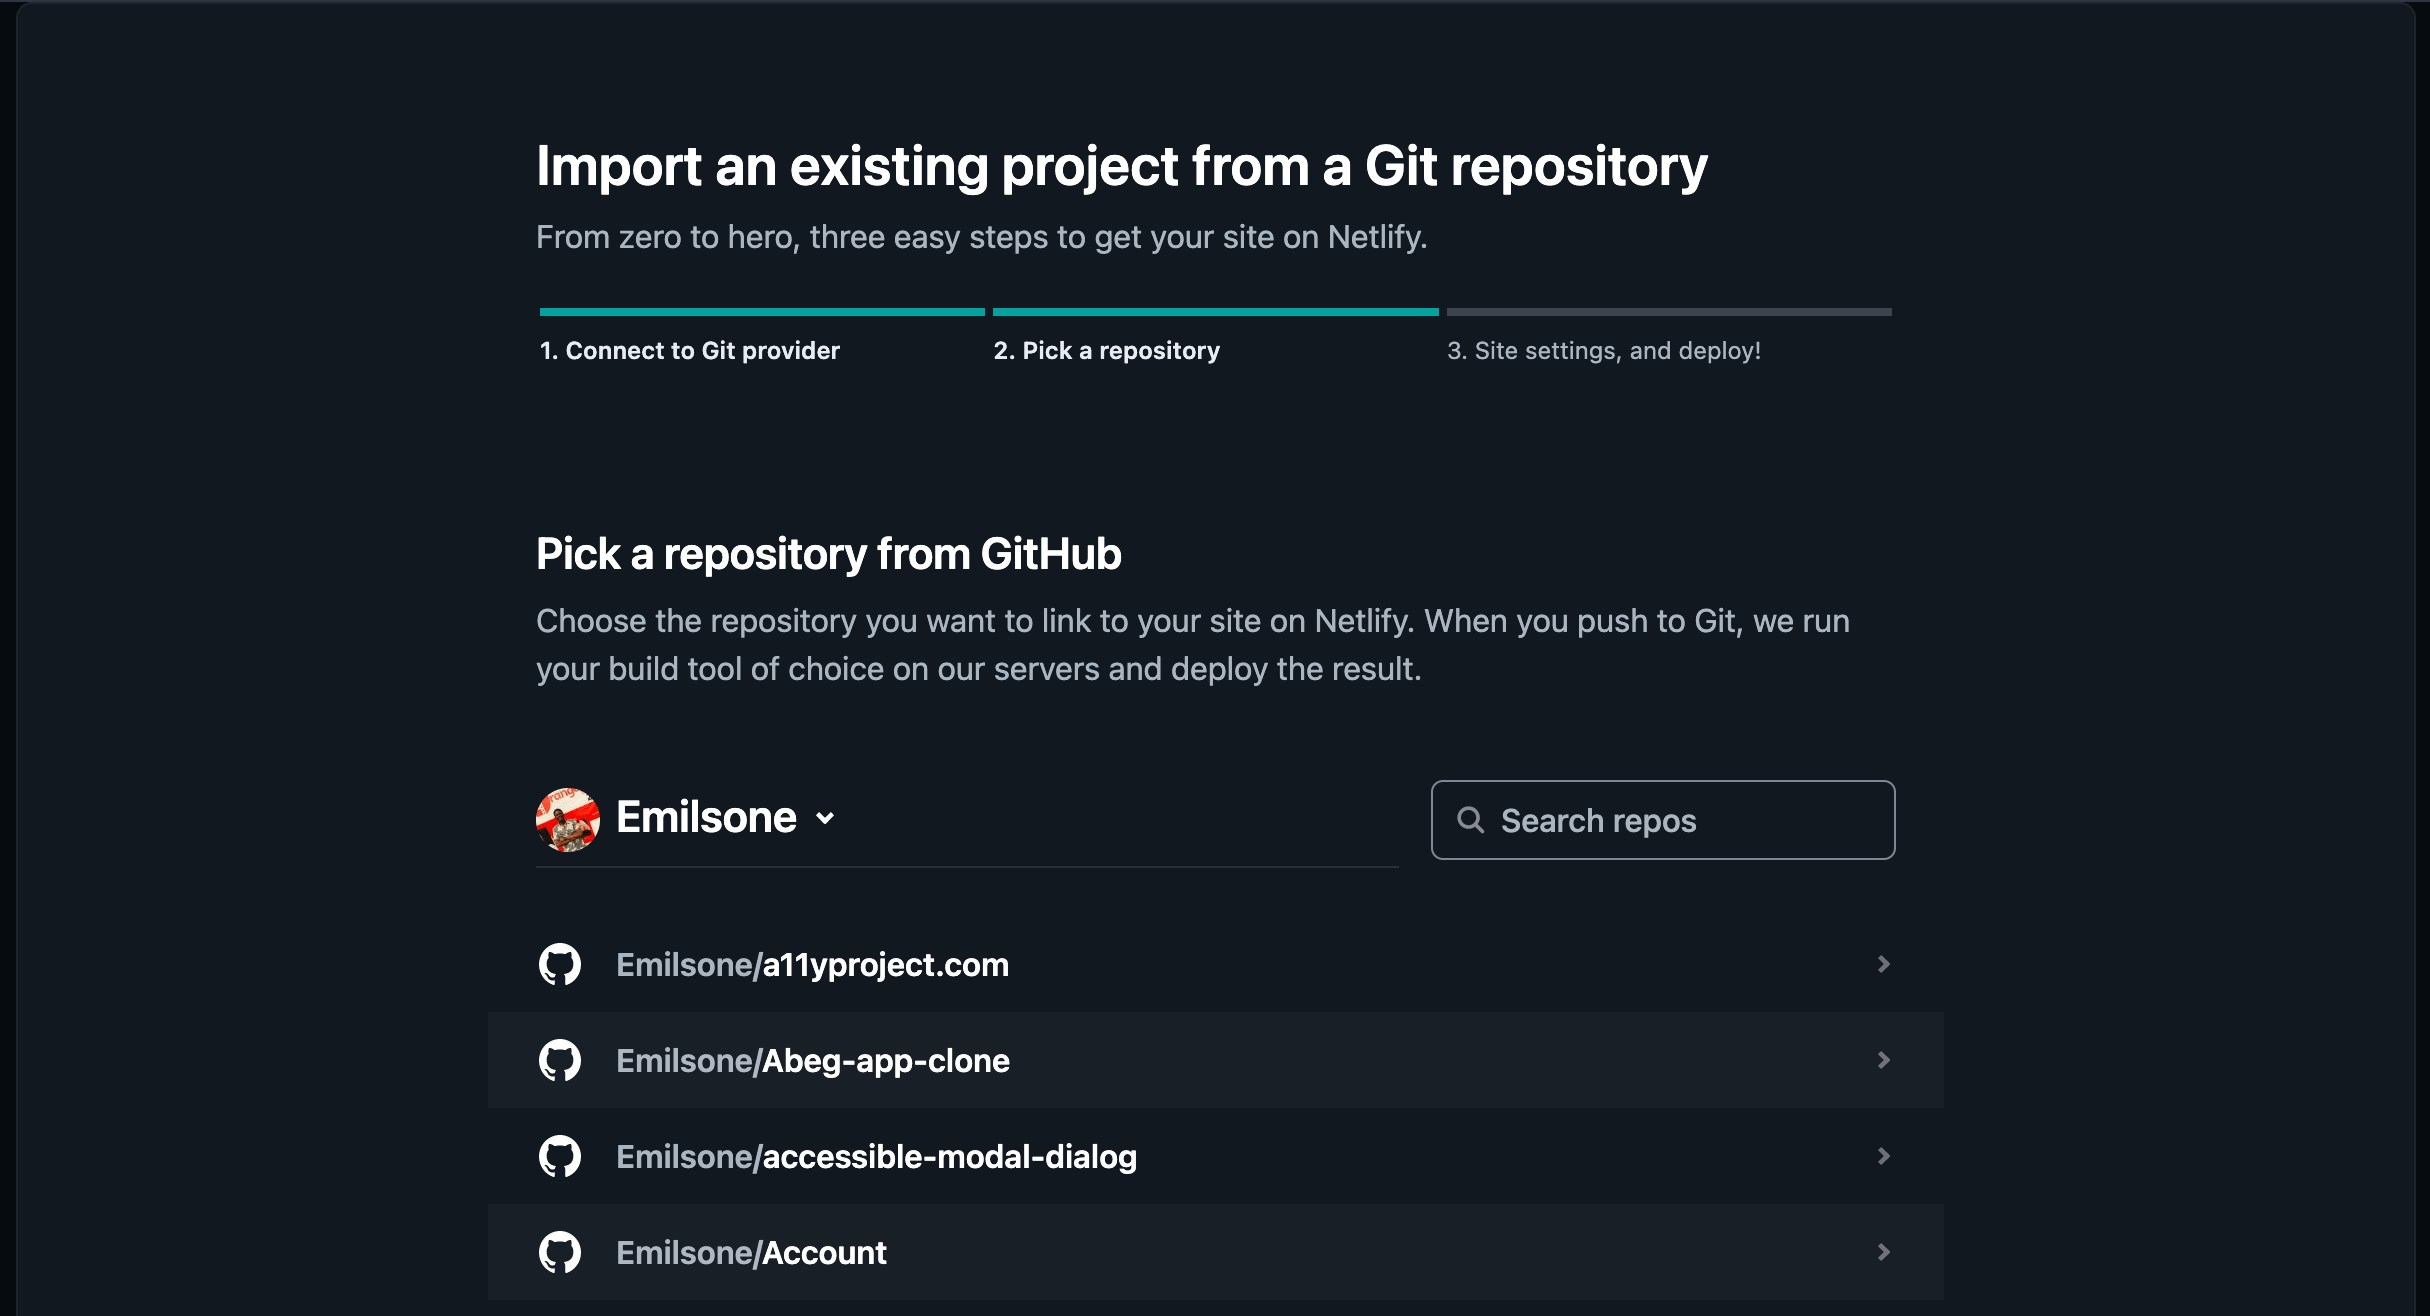 After selecting GitHub, you can Pick repo from GitHub